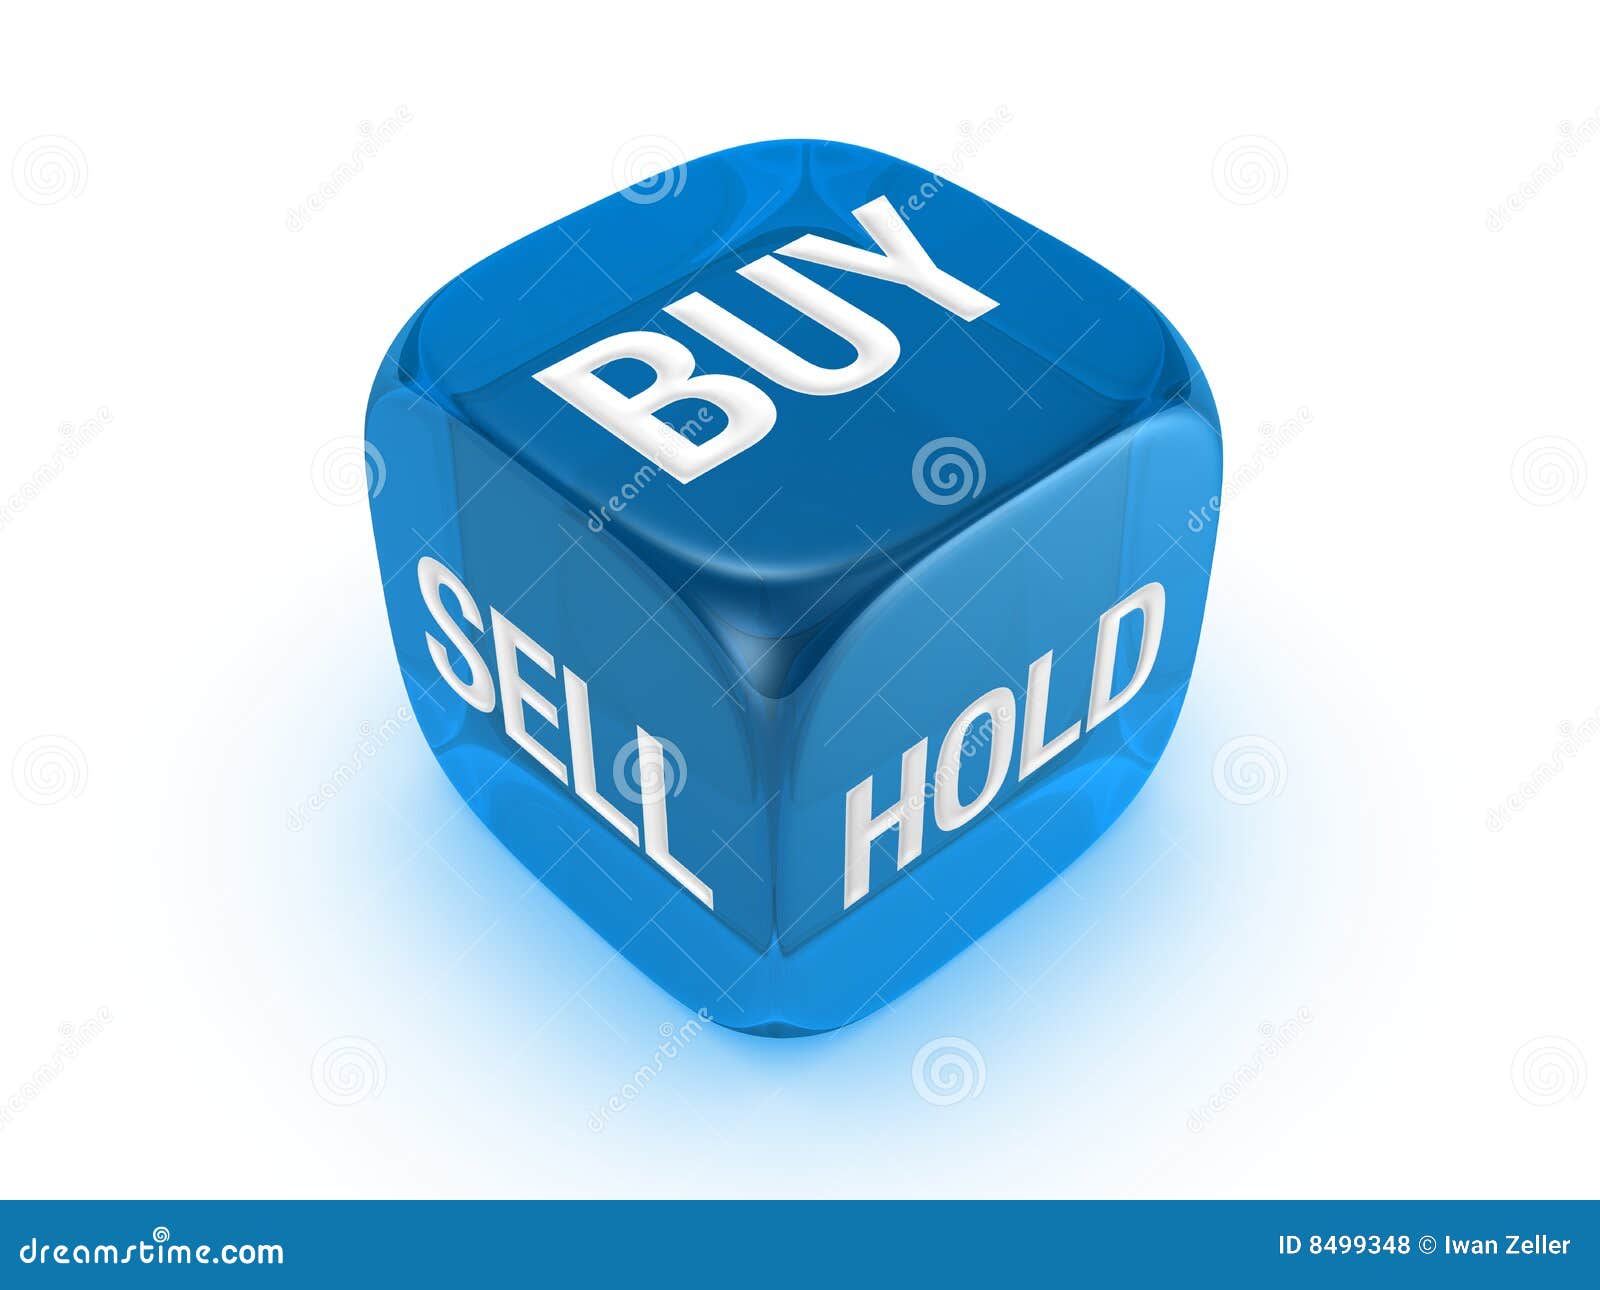 translucent blue dice with buy, sell, hold sign